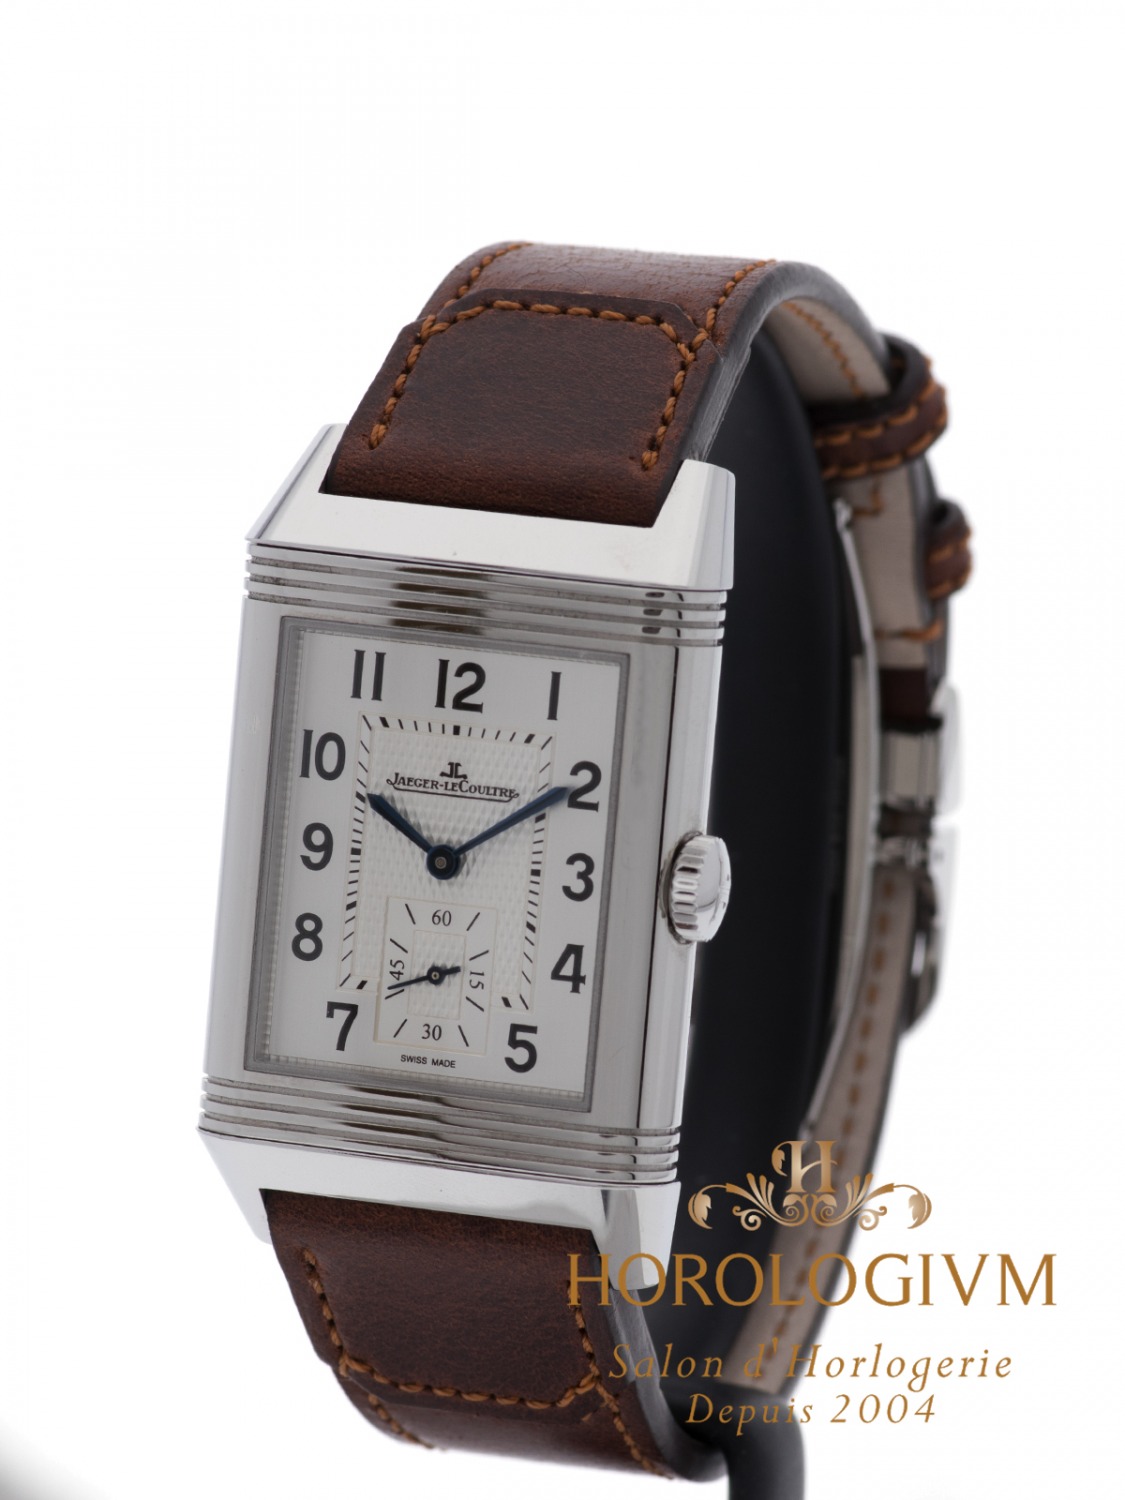 Jaeger LeCoultre CLASSIC LARGE DUOFACE SMALL SECONDS REF. Q3848422 watch, silver